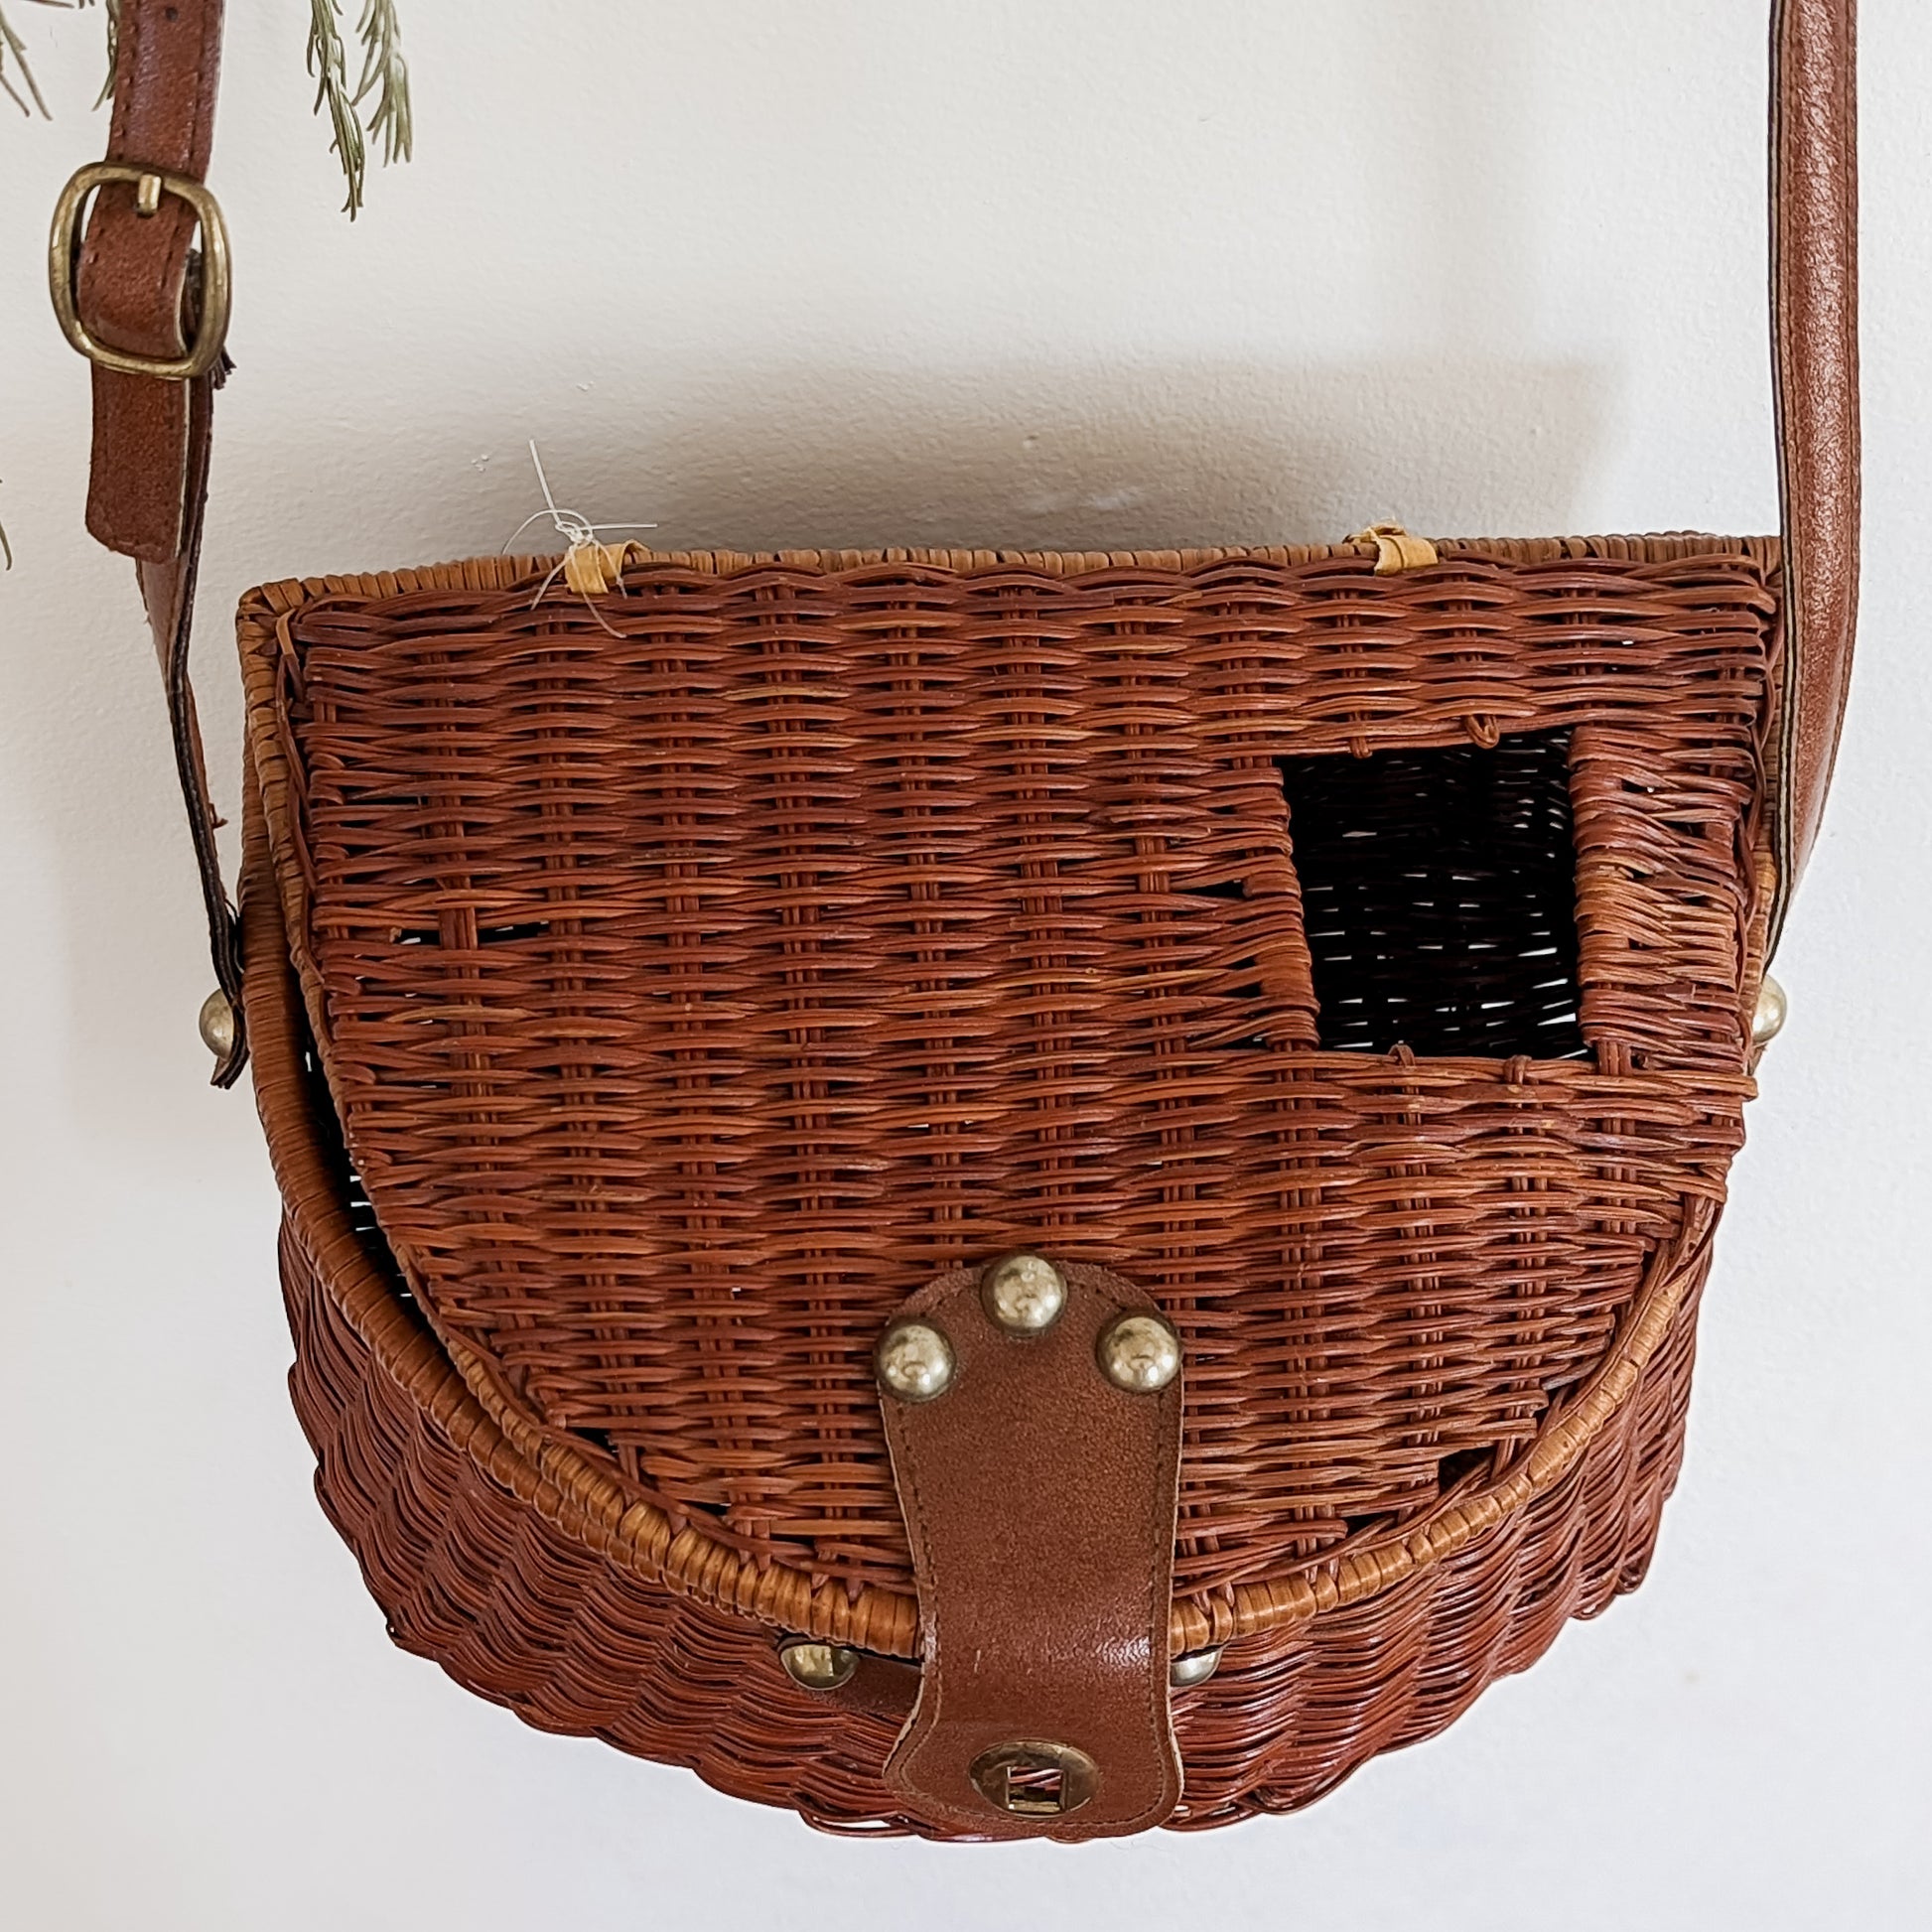 Woven Creel Basket / Foraging Basket with Leather Strap – 3 Chickadee Market